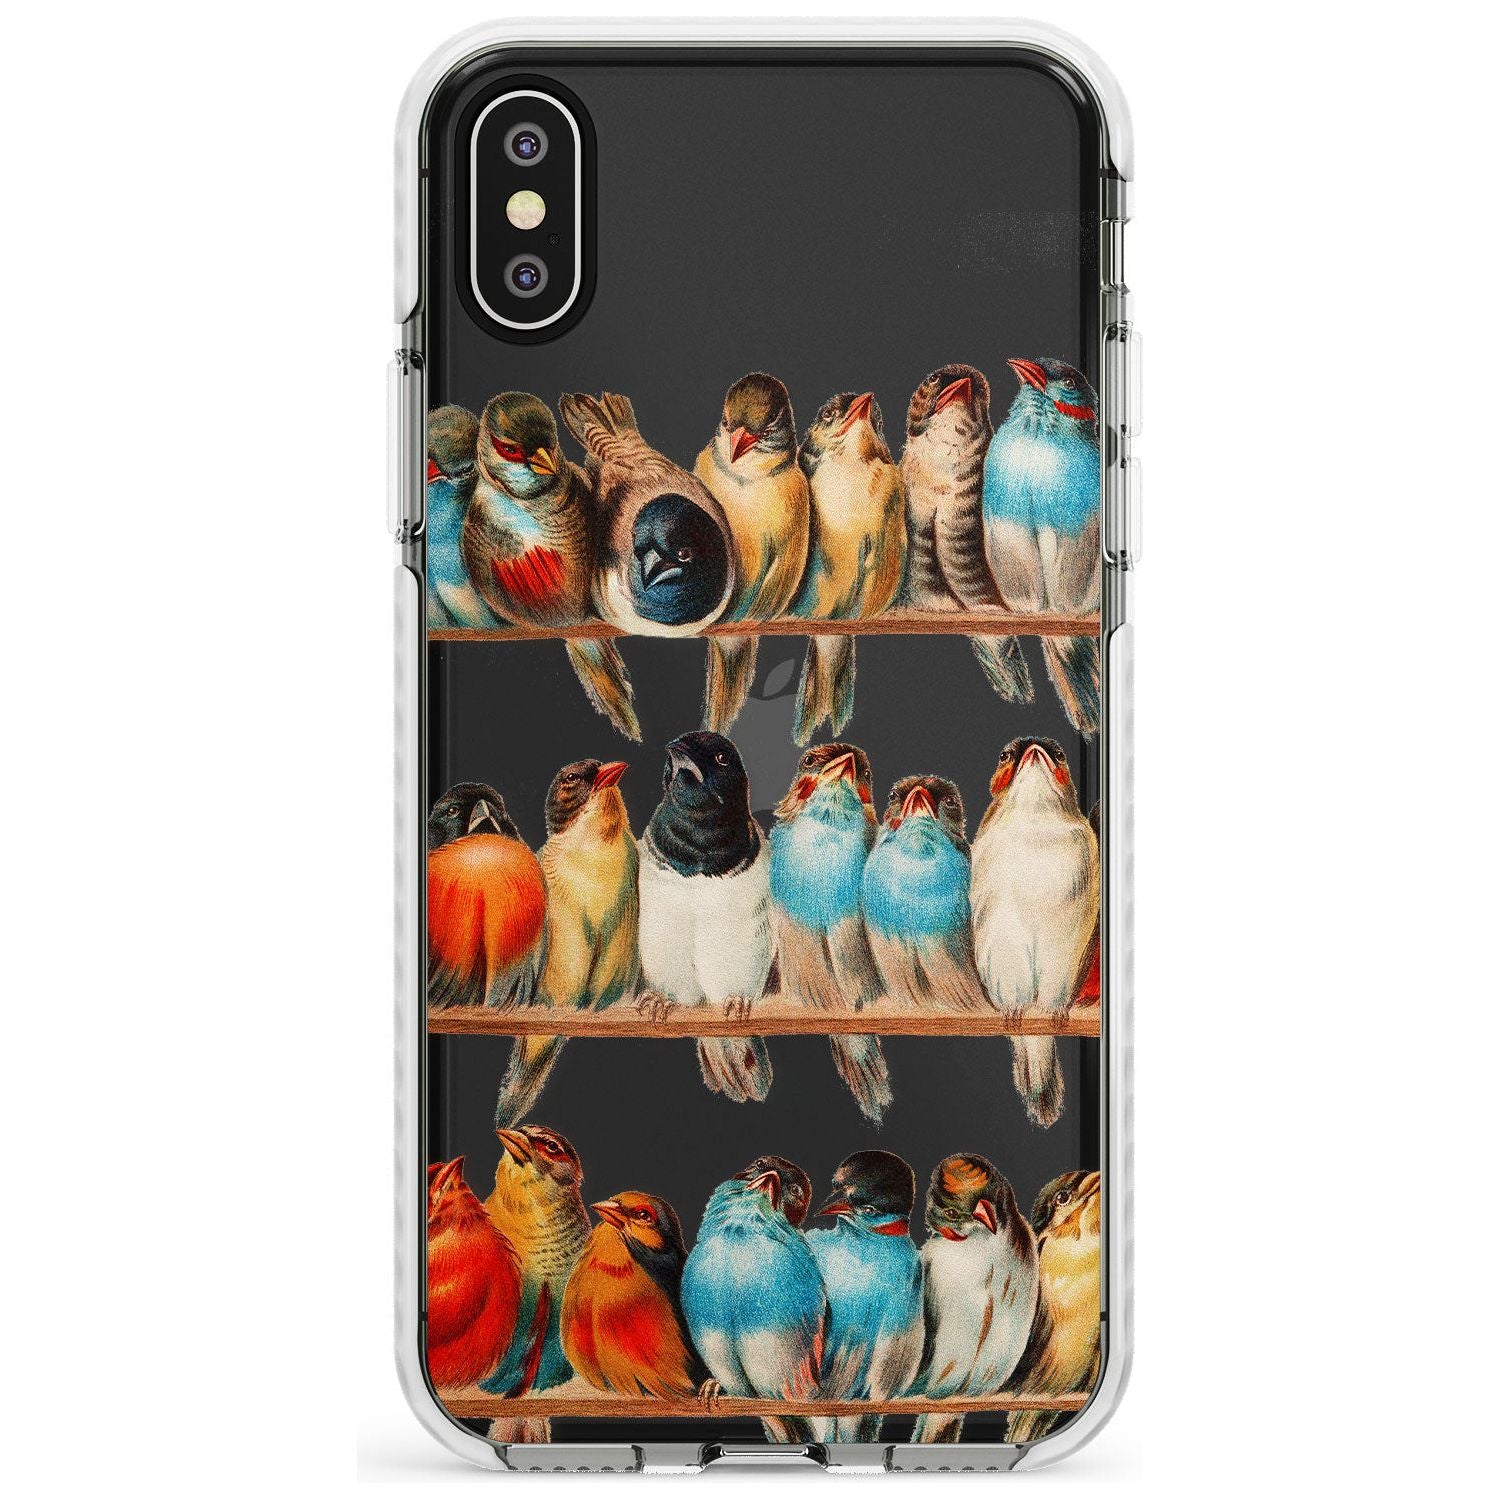 A Perch of Birds Impact Phone Case for iPhone X XS Max XR